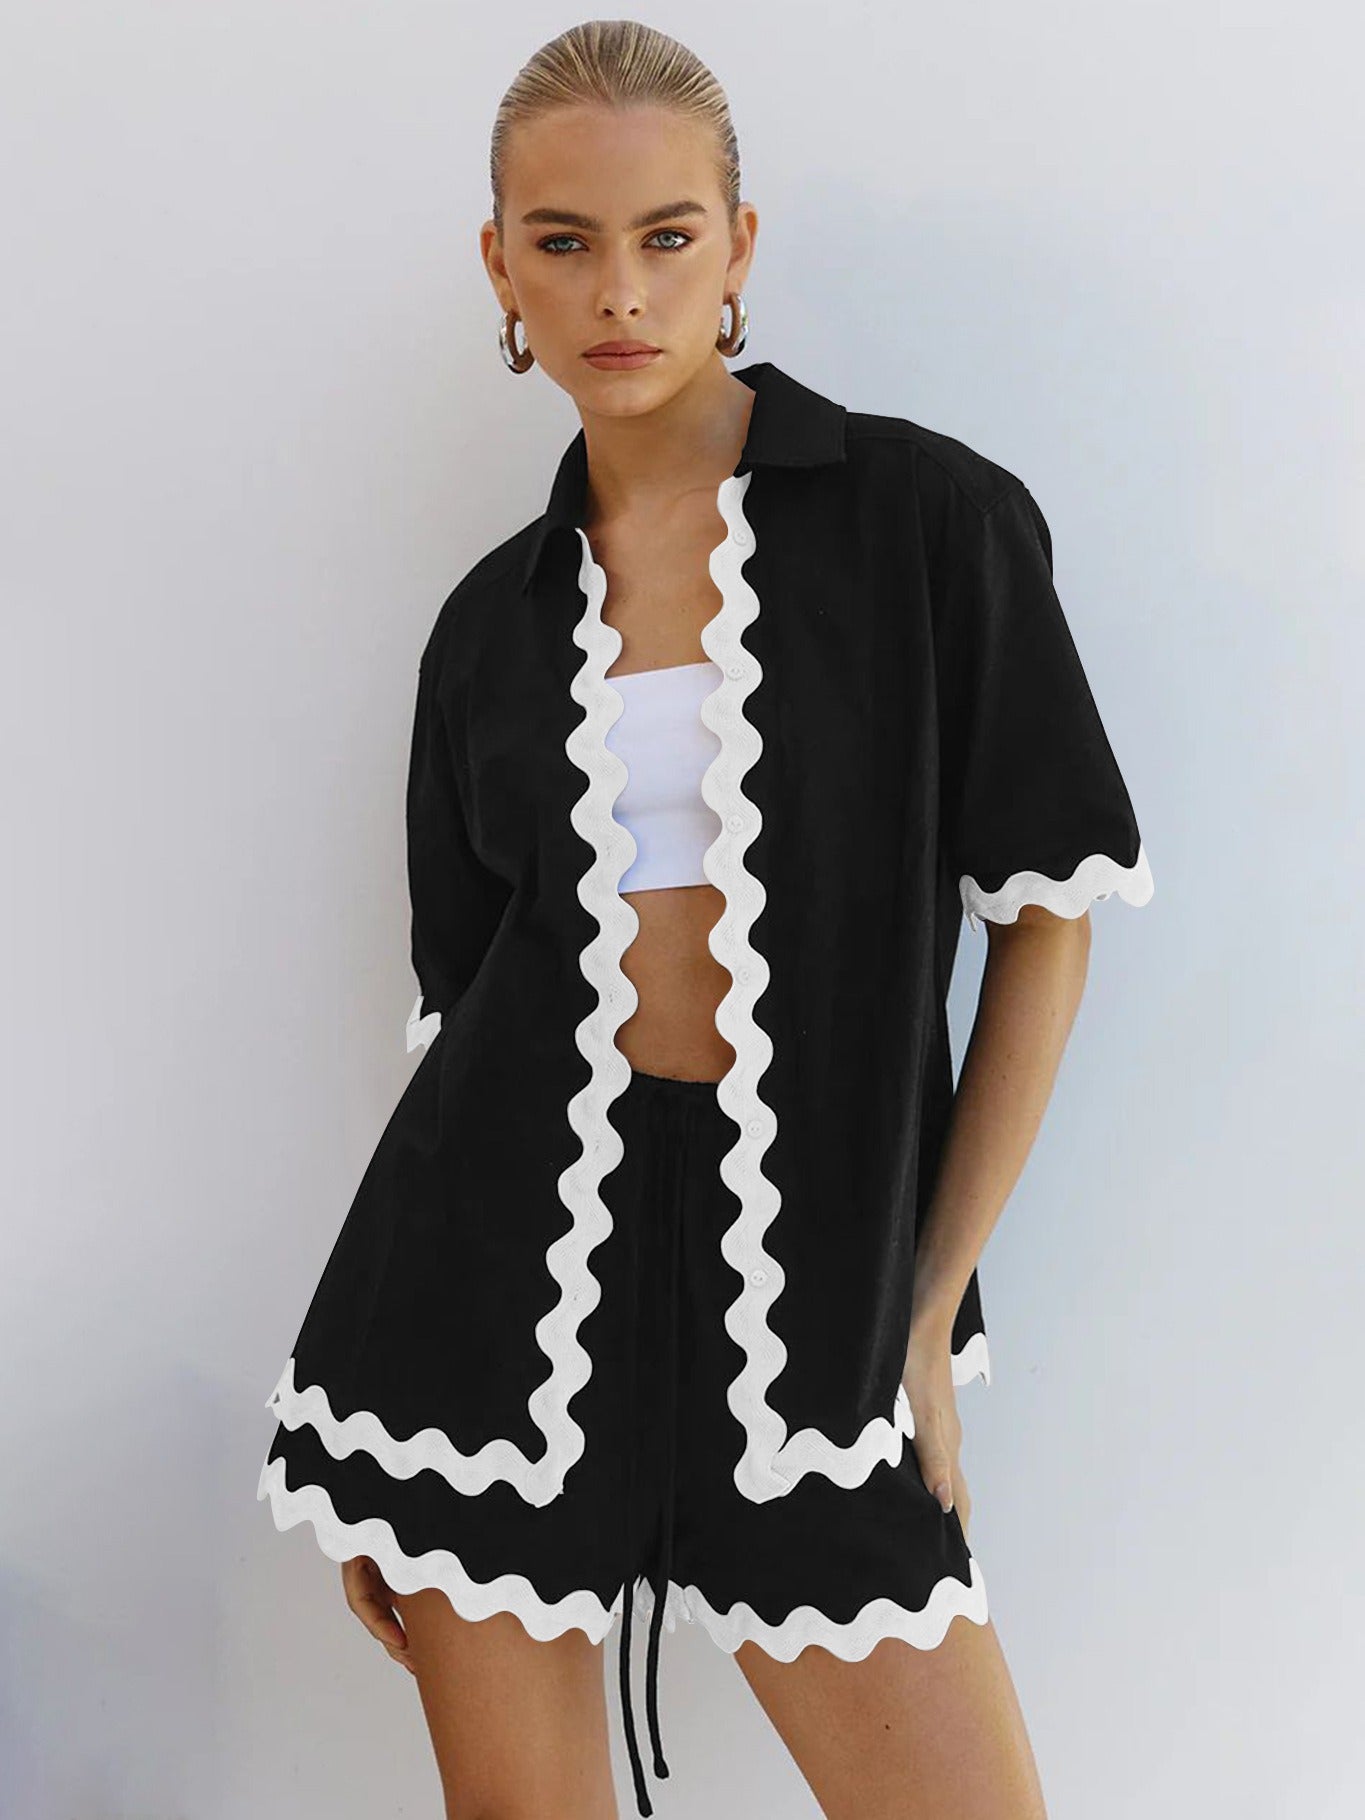 Fashion suit for women European and American short-sleeved button-down shirt casual loose shorts two-piece suit